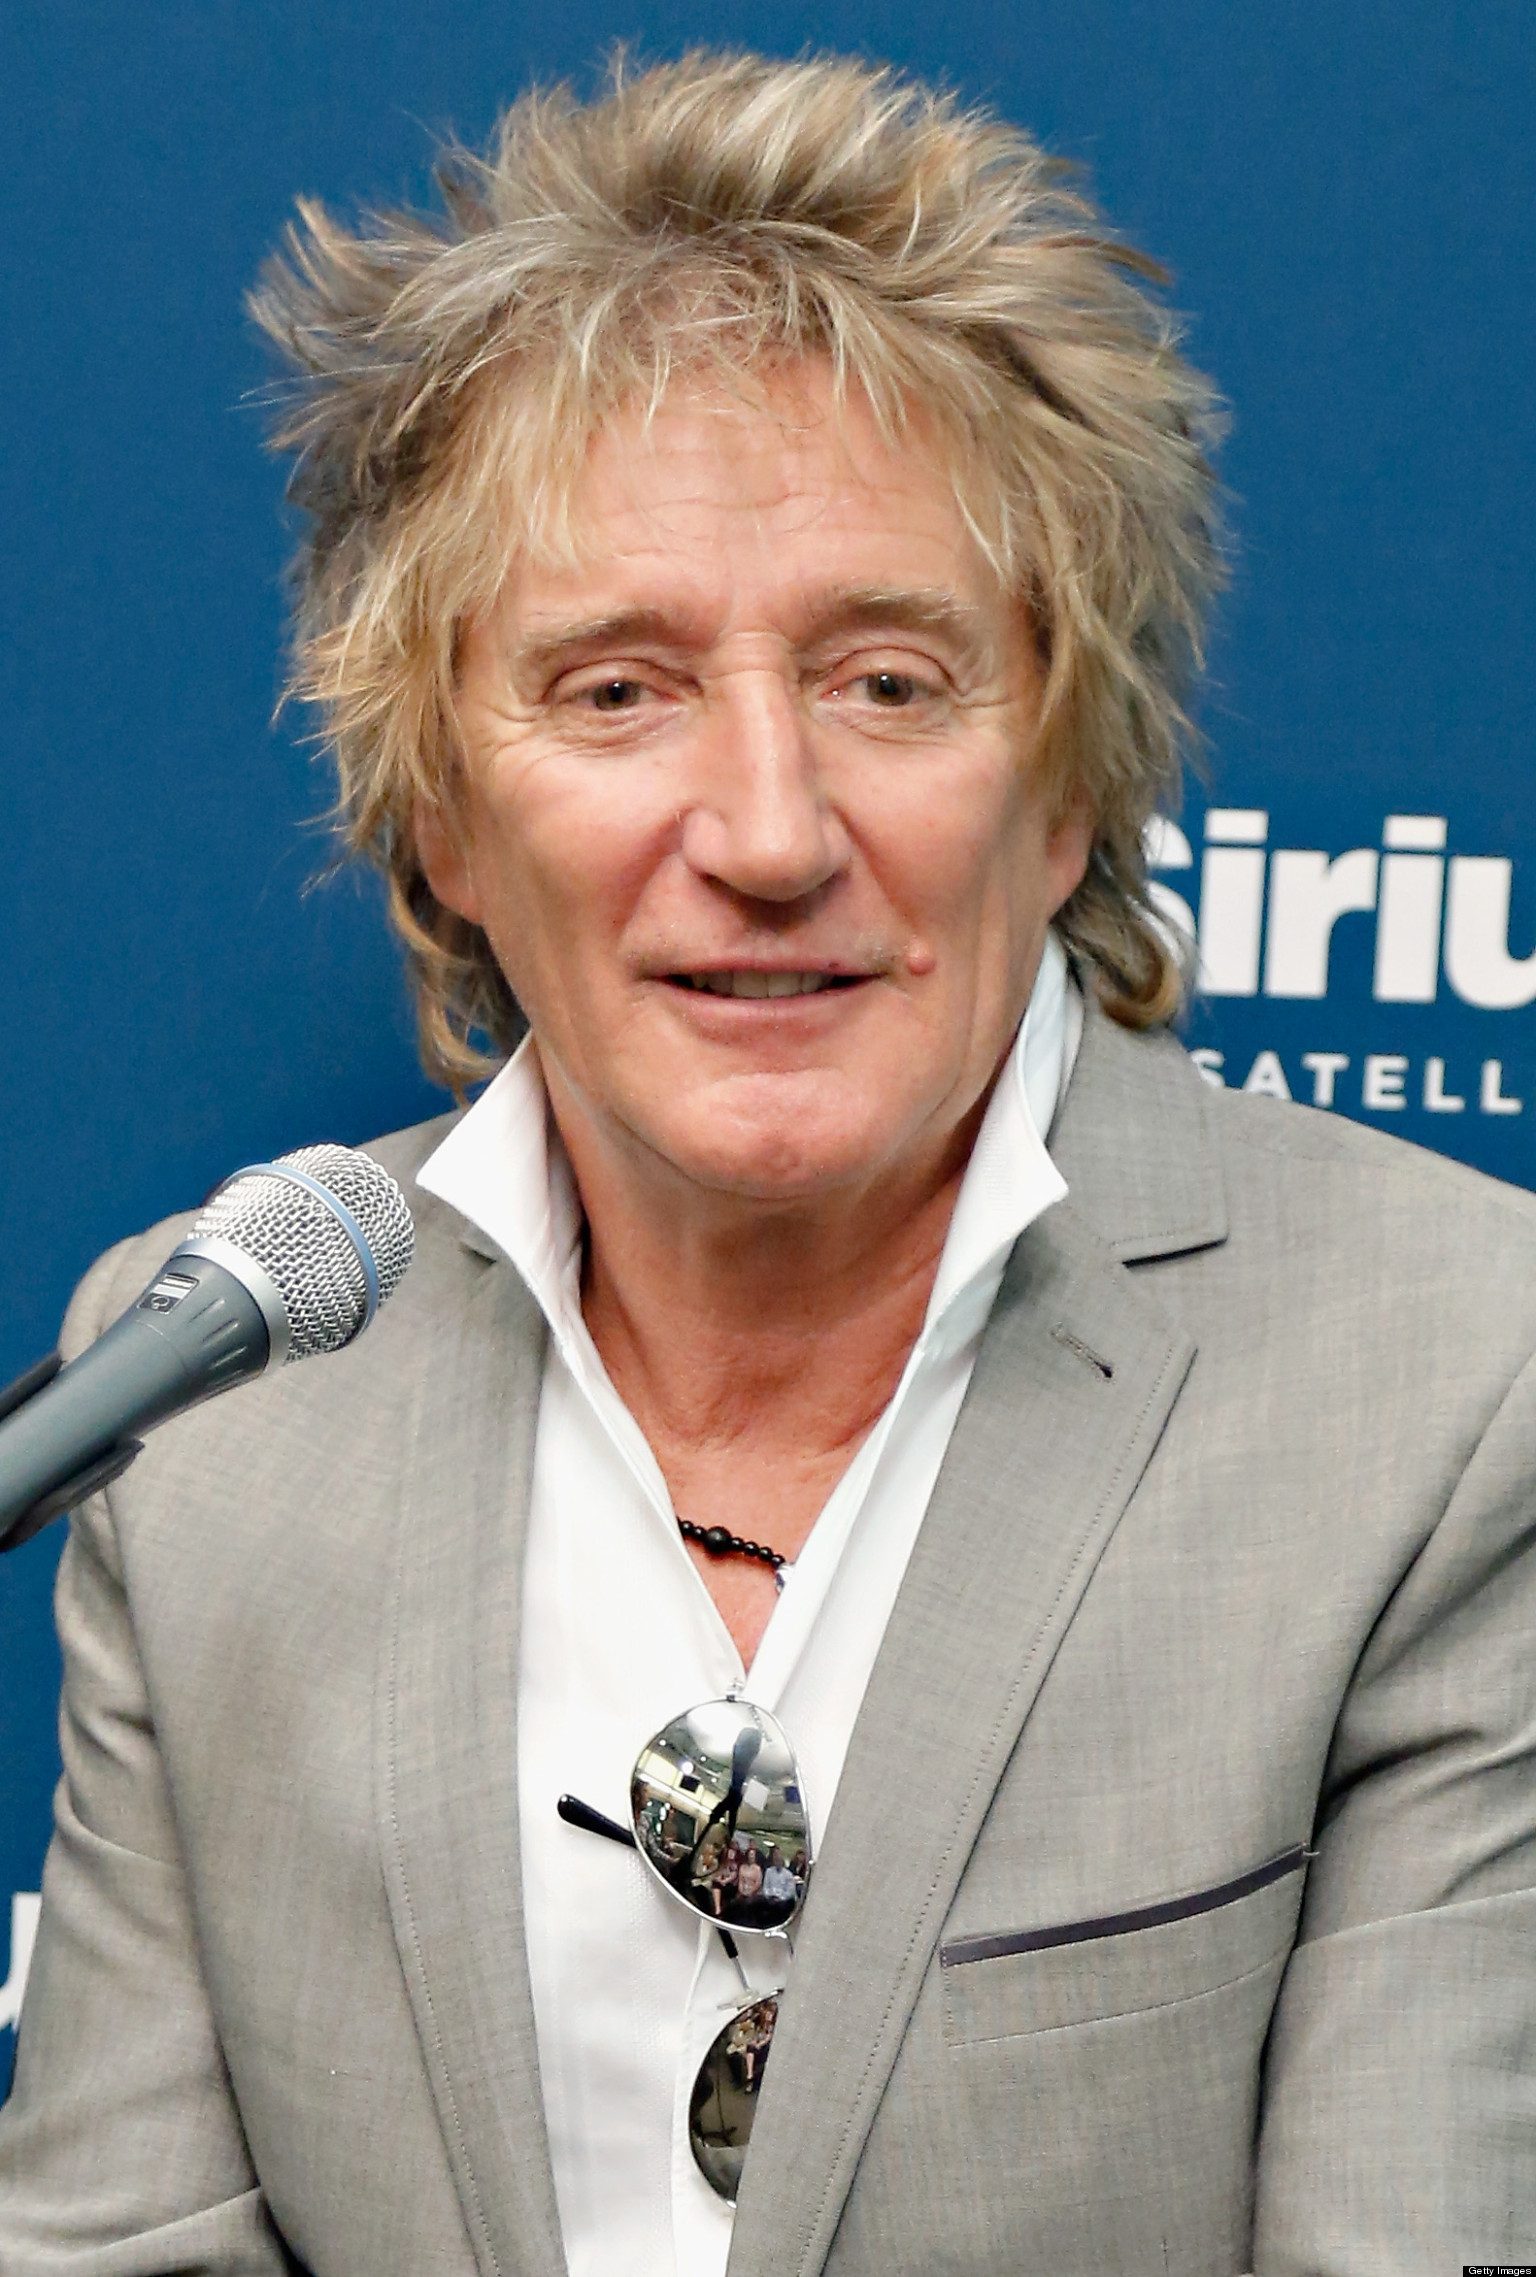 Rod Stewart's Penis Shrunk From Steroid Use | HuffPost